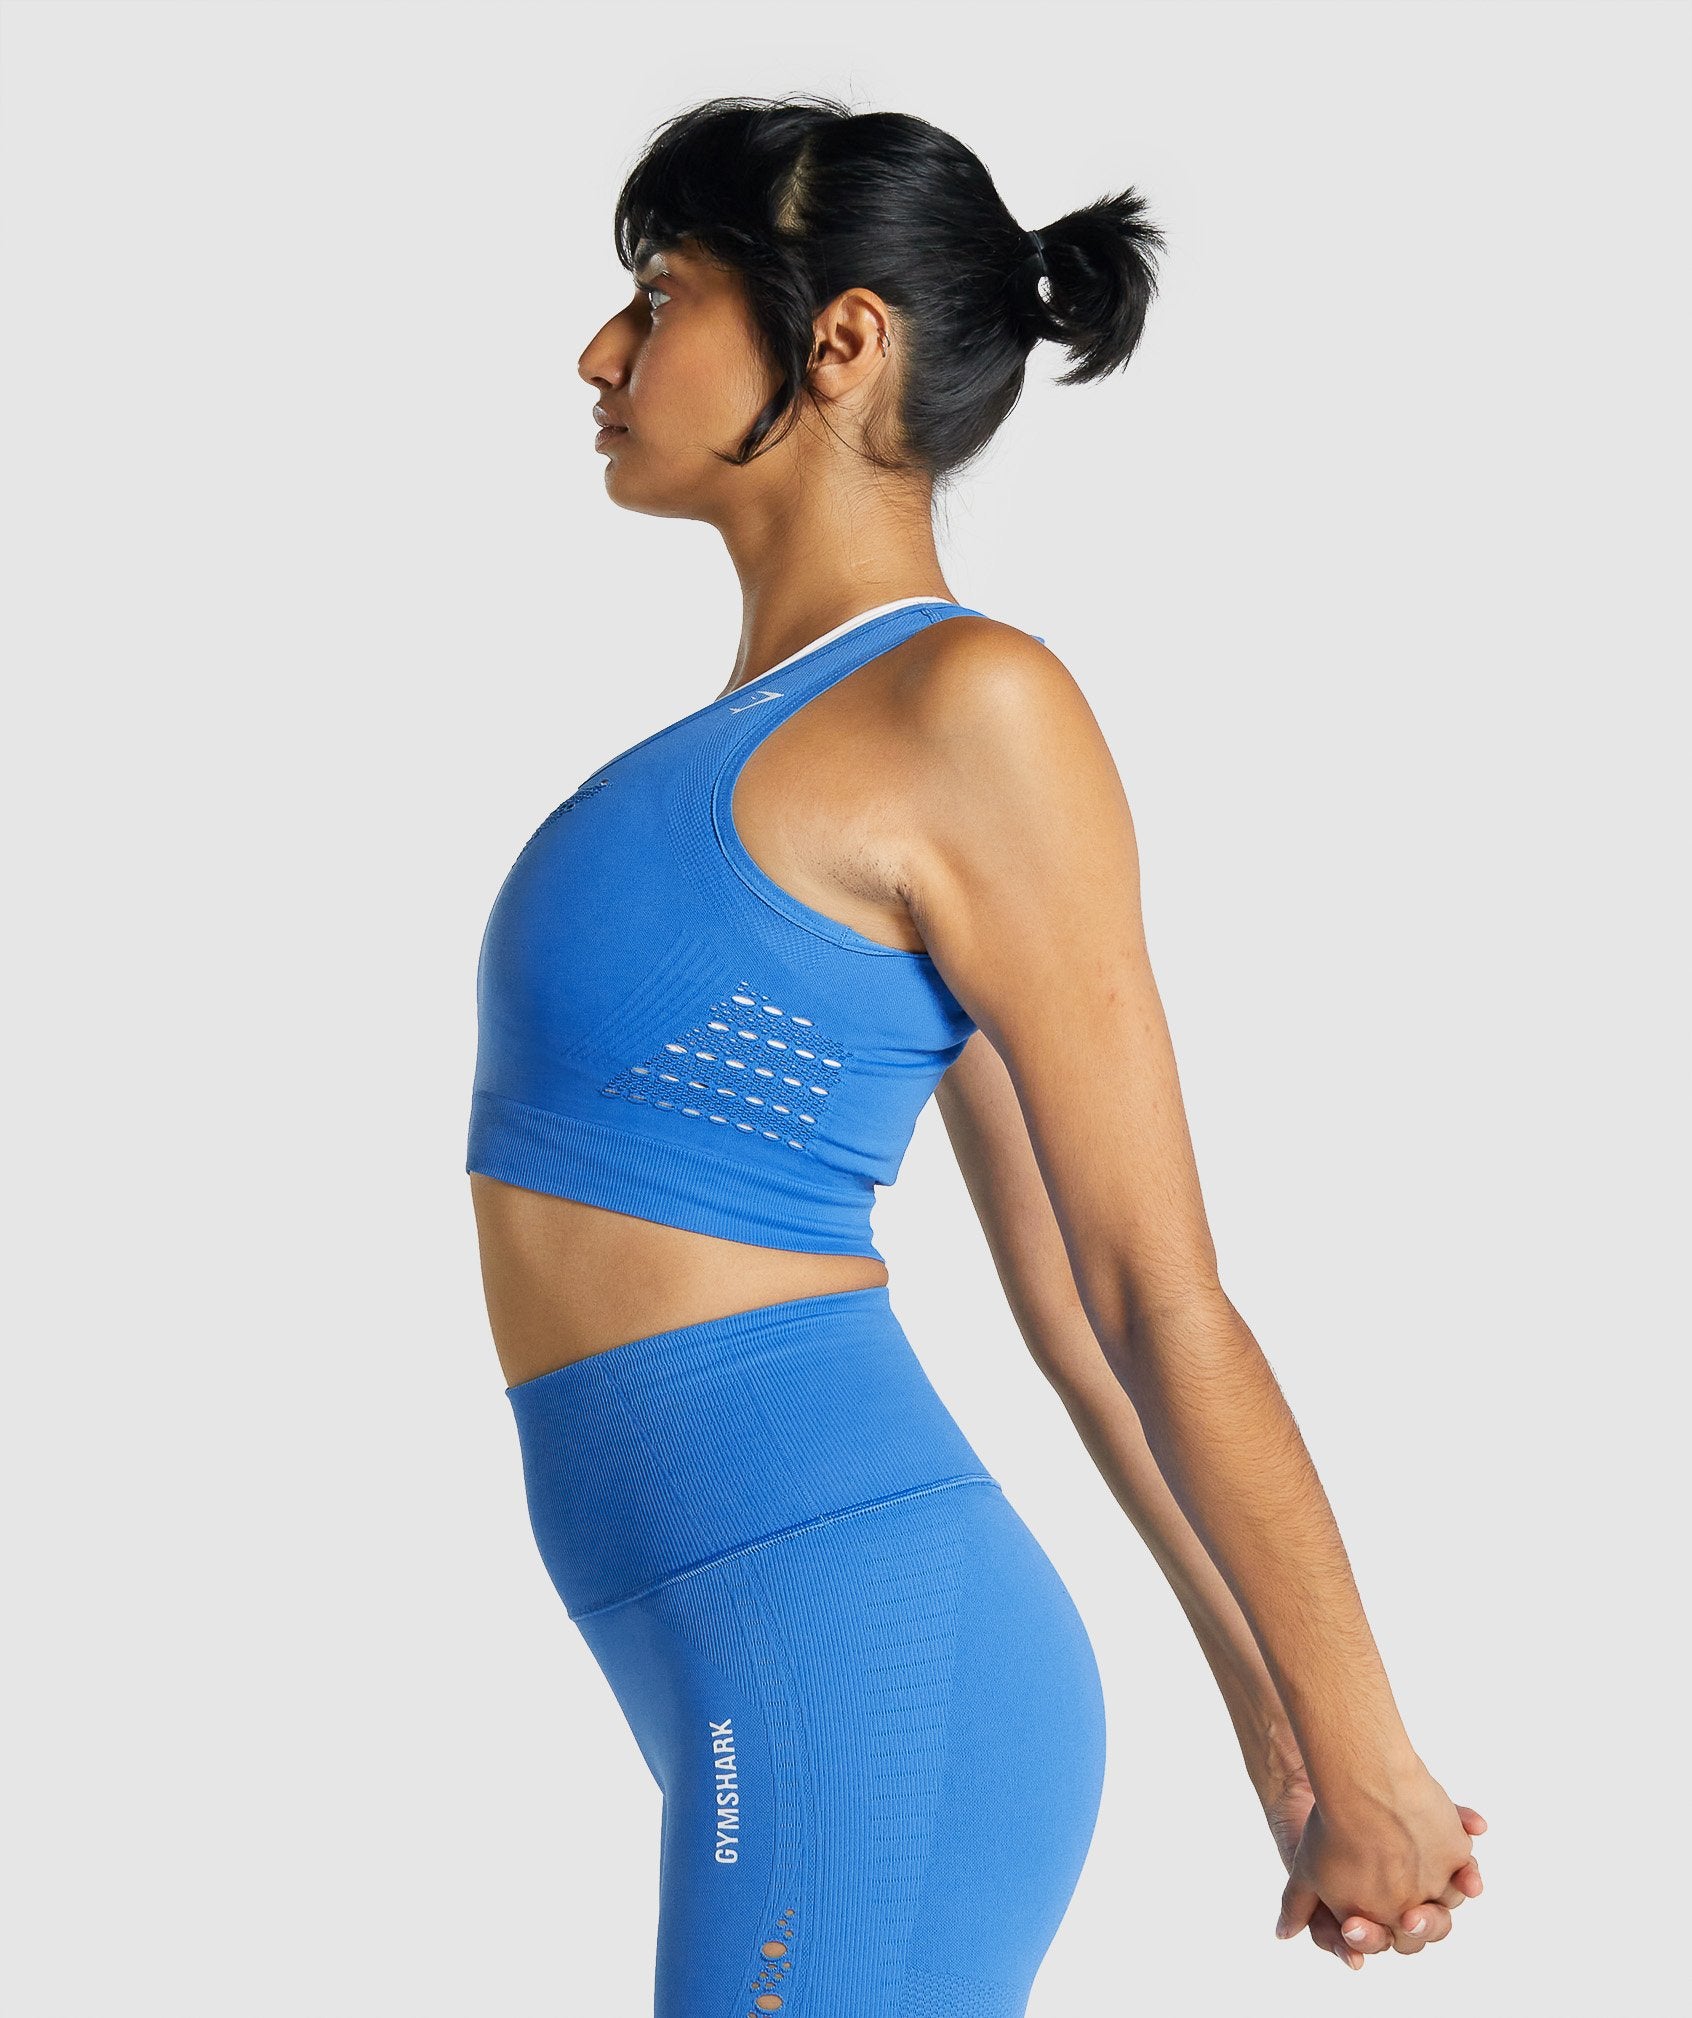 Gymshark model wearing the Energy+ Seamless in Indigo. Power up and  increase the effort for your work…